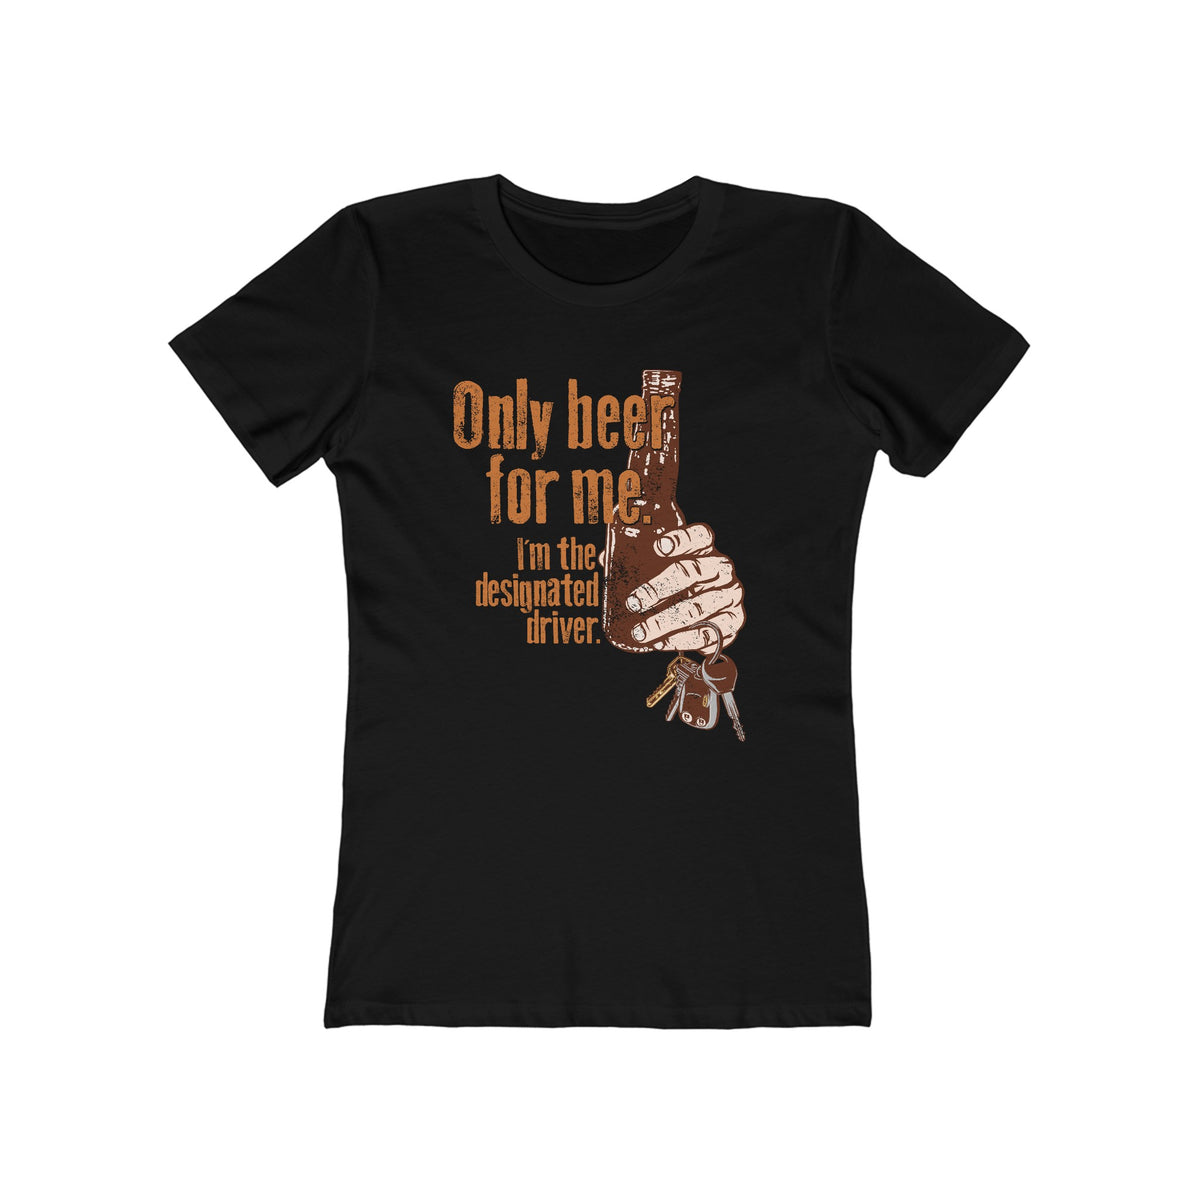 Only Beer For Me. I'm The Designated Driver. - Women’s T-Shirt